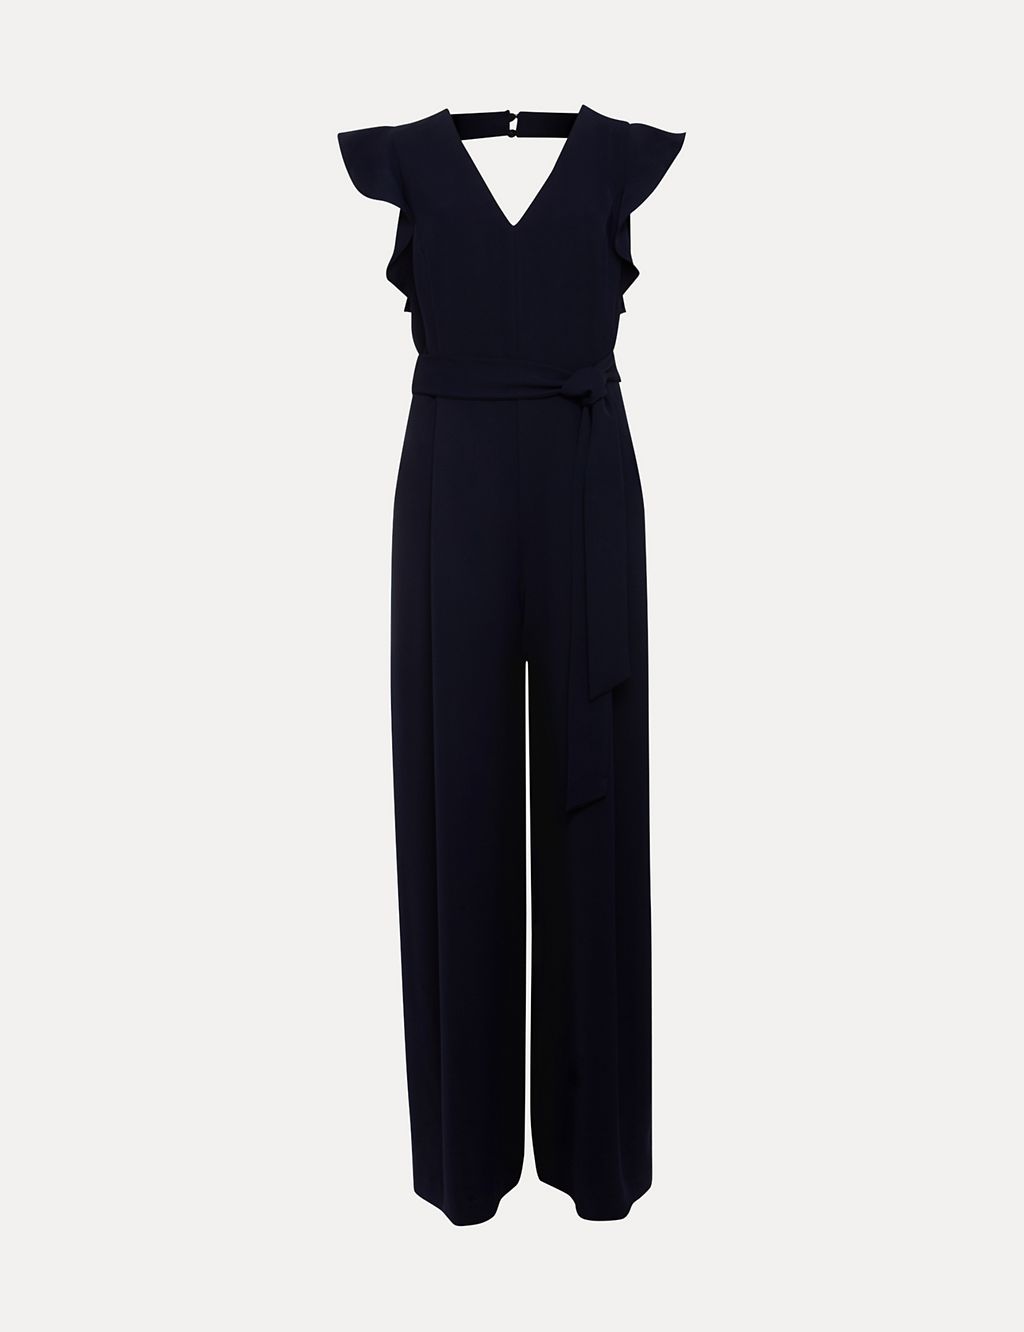 Belted Sleeveless Wide Leg Jumpsuit 1 of 6